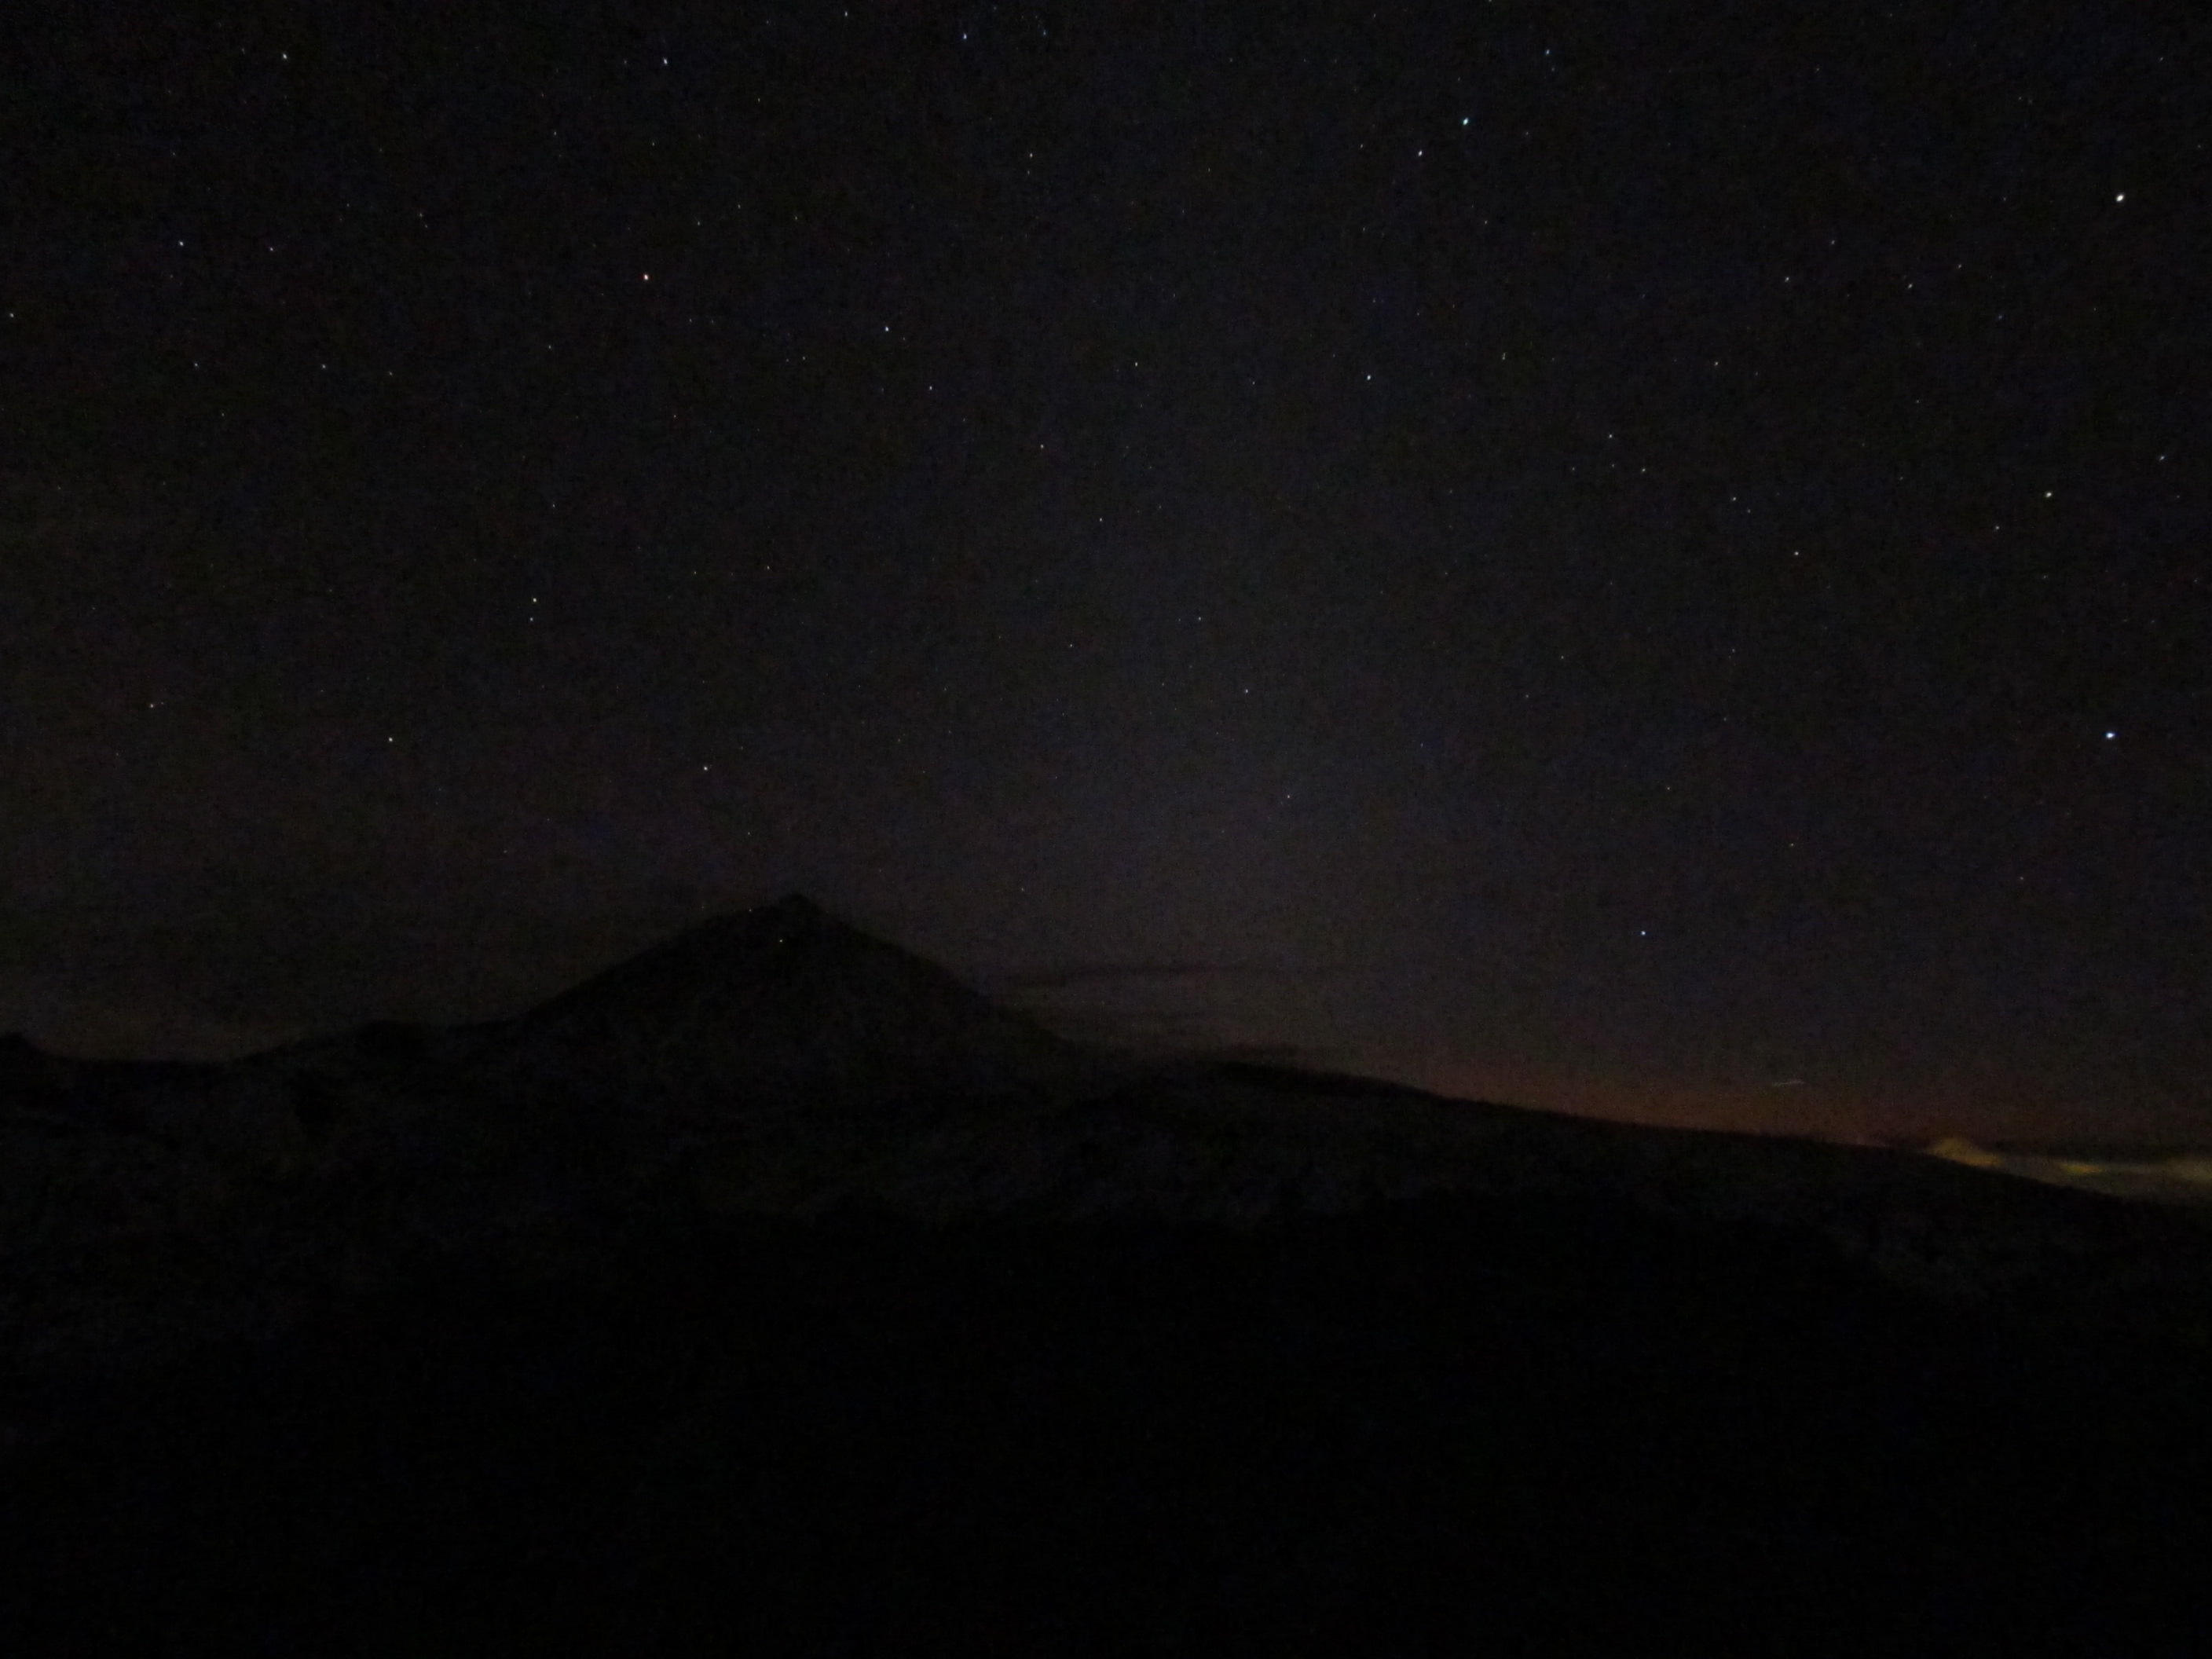 Mount Teide and zodiacal light Canon Powershoot SX 130 IS